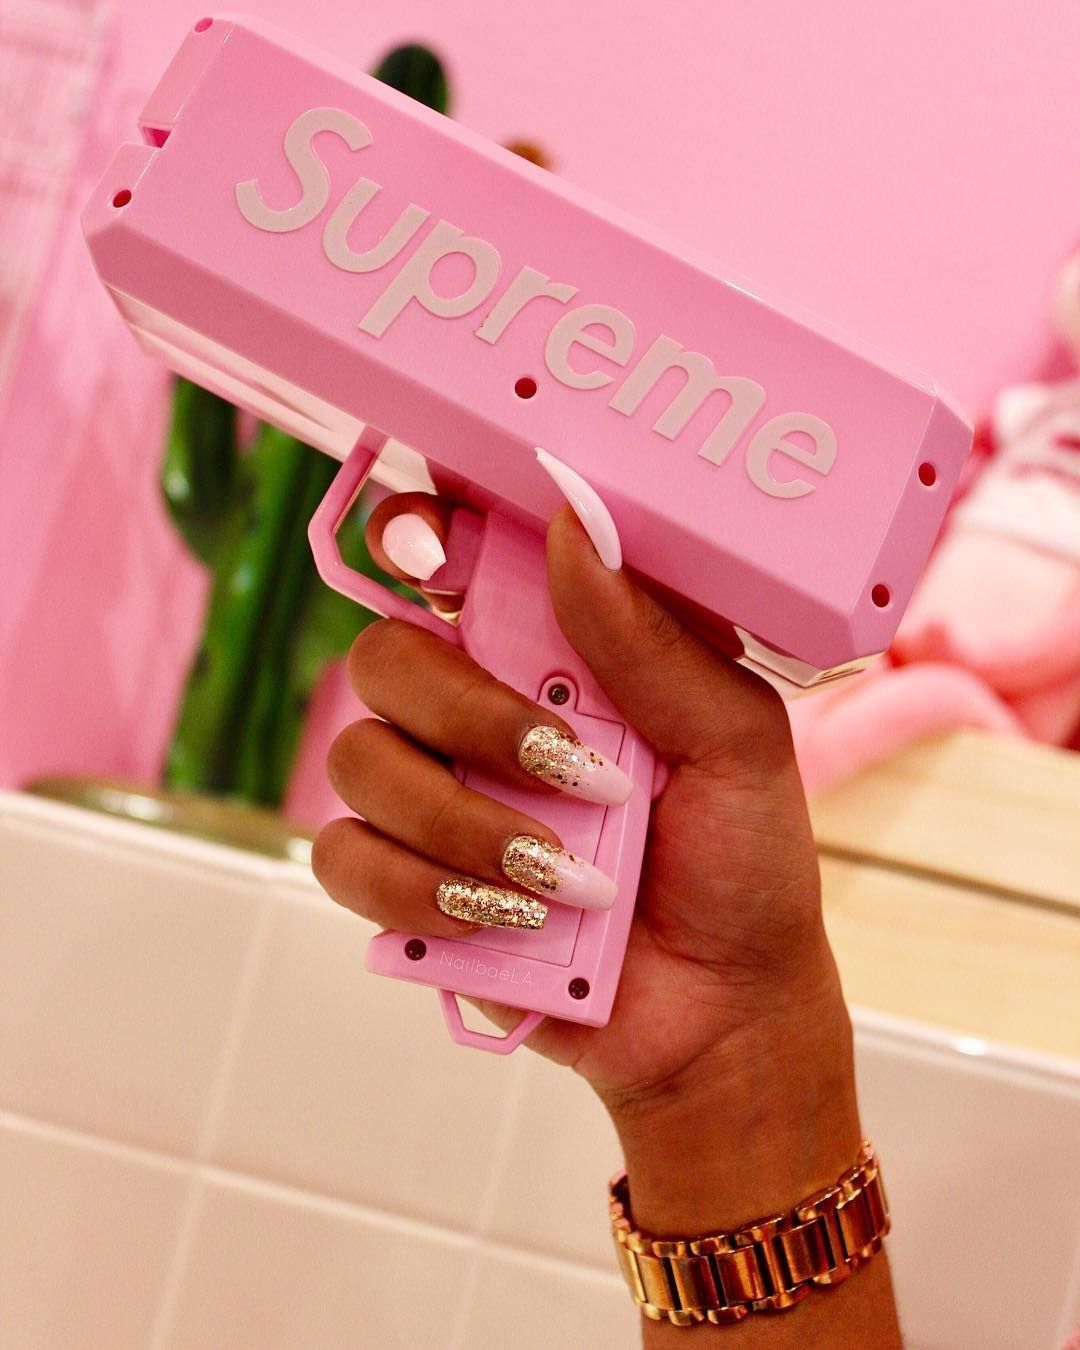 A hand with glittery nails holding a pink gun. - Nails, Supreme